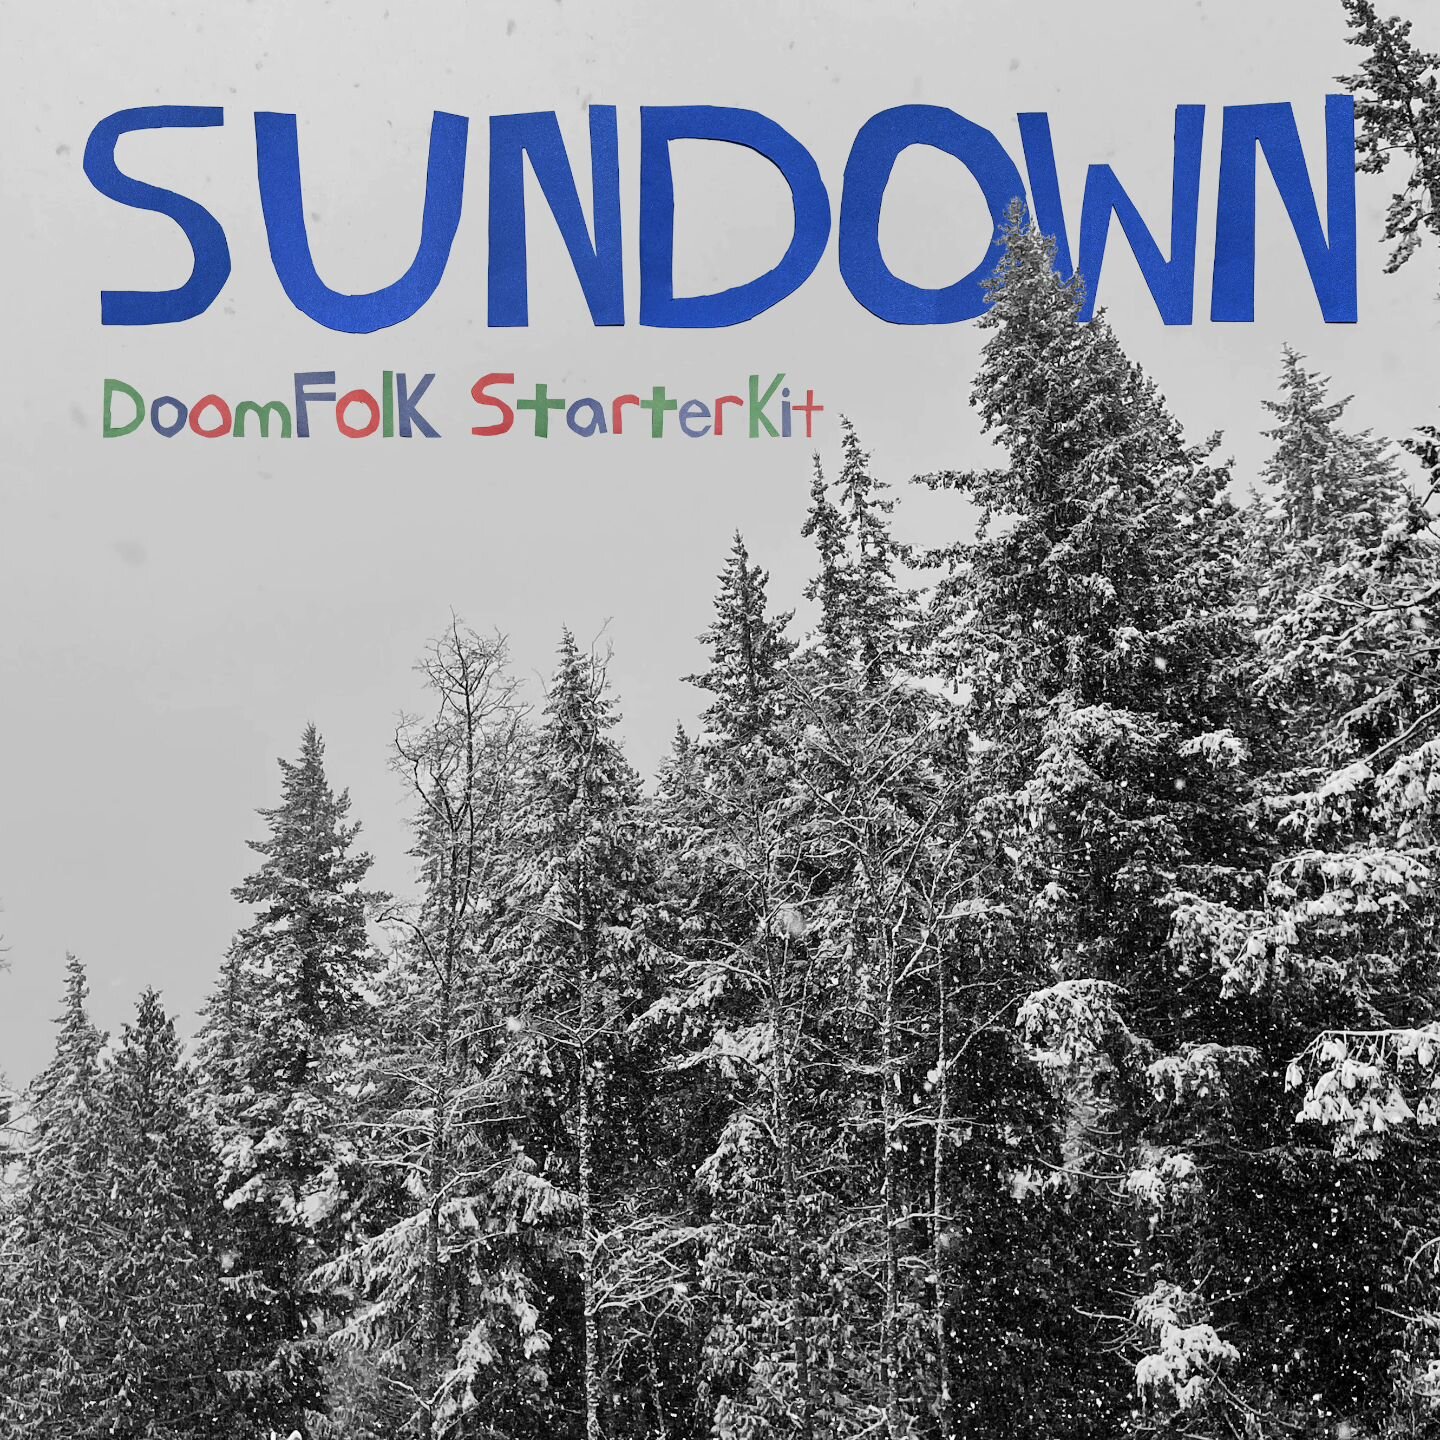 Oooooooh boy! Cozy on up this weekend with the soothing tunes of @doomfolkstarterkit's latest seasonal endeavor, &quot;SUNDOWN&quot;, created in honor of the winter solstice.
The full record comes out next week on the solstice proper, so in the meant